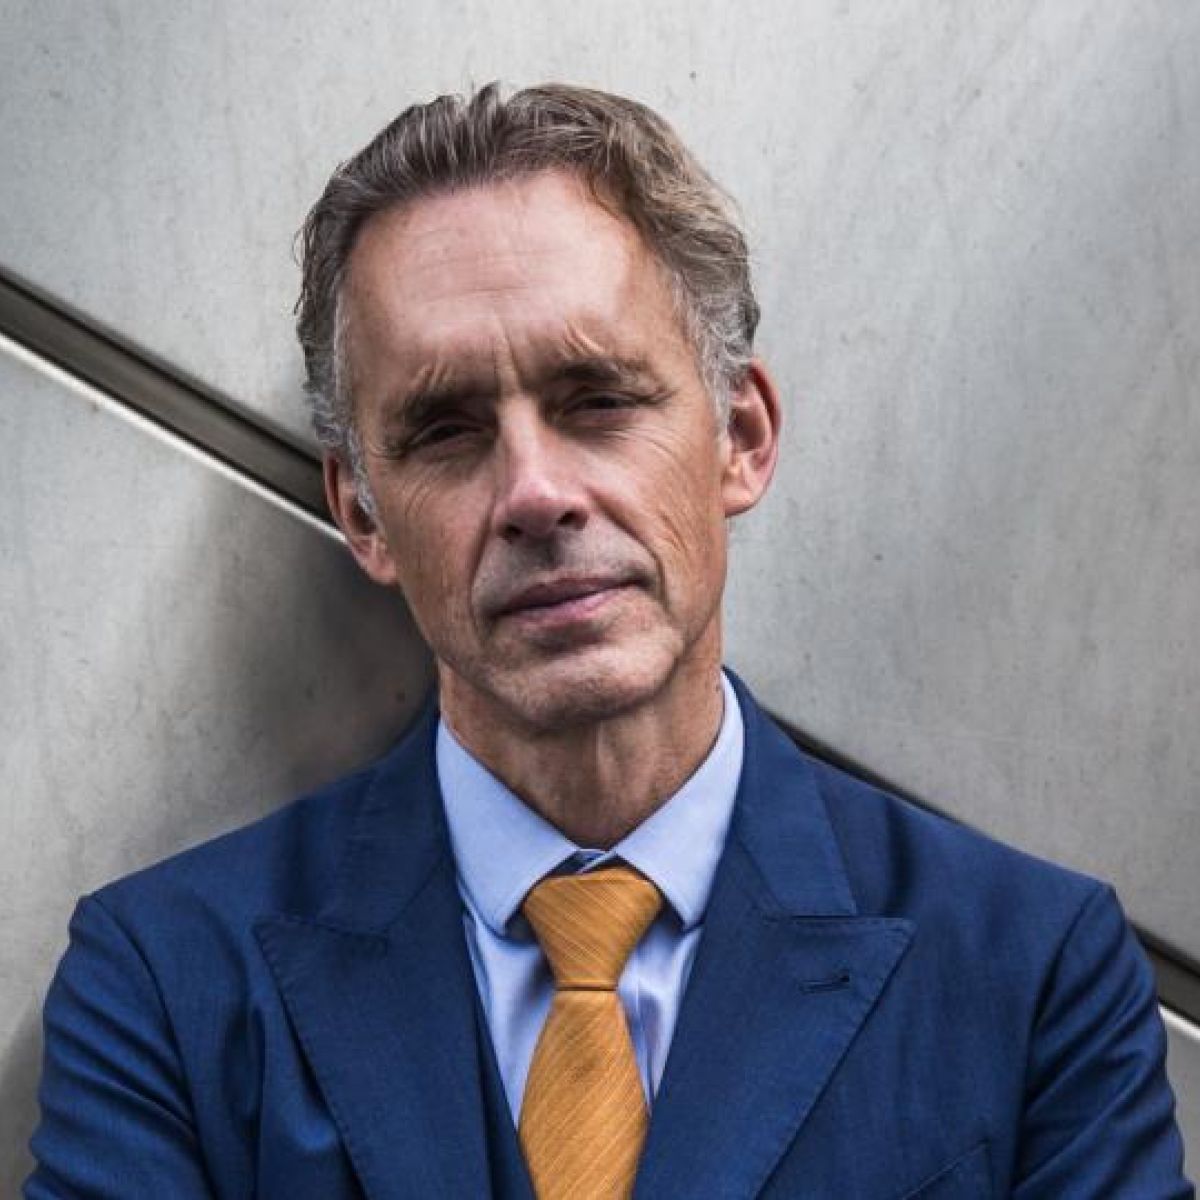 Jordan Peterson: the hell's wrong with self-help books?'